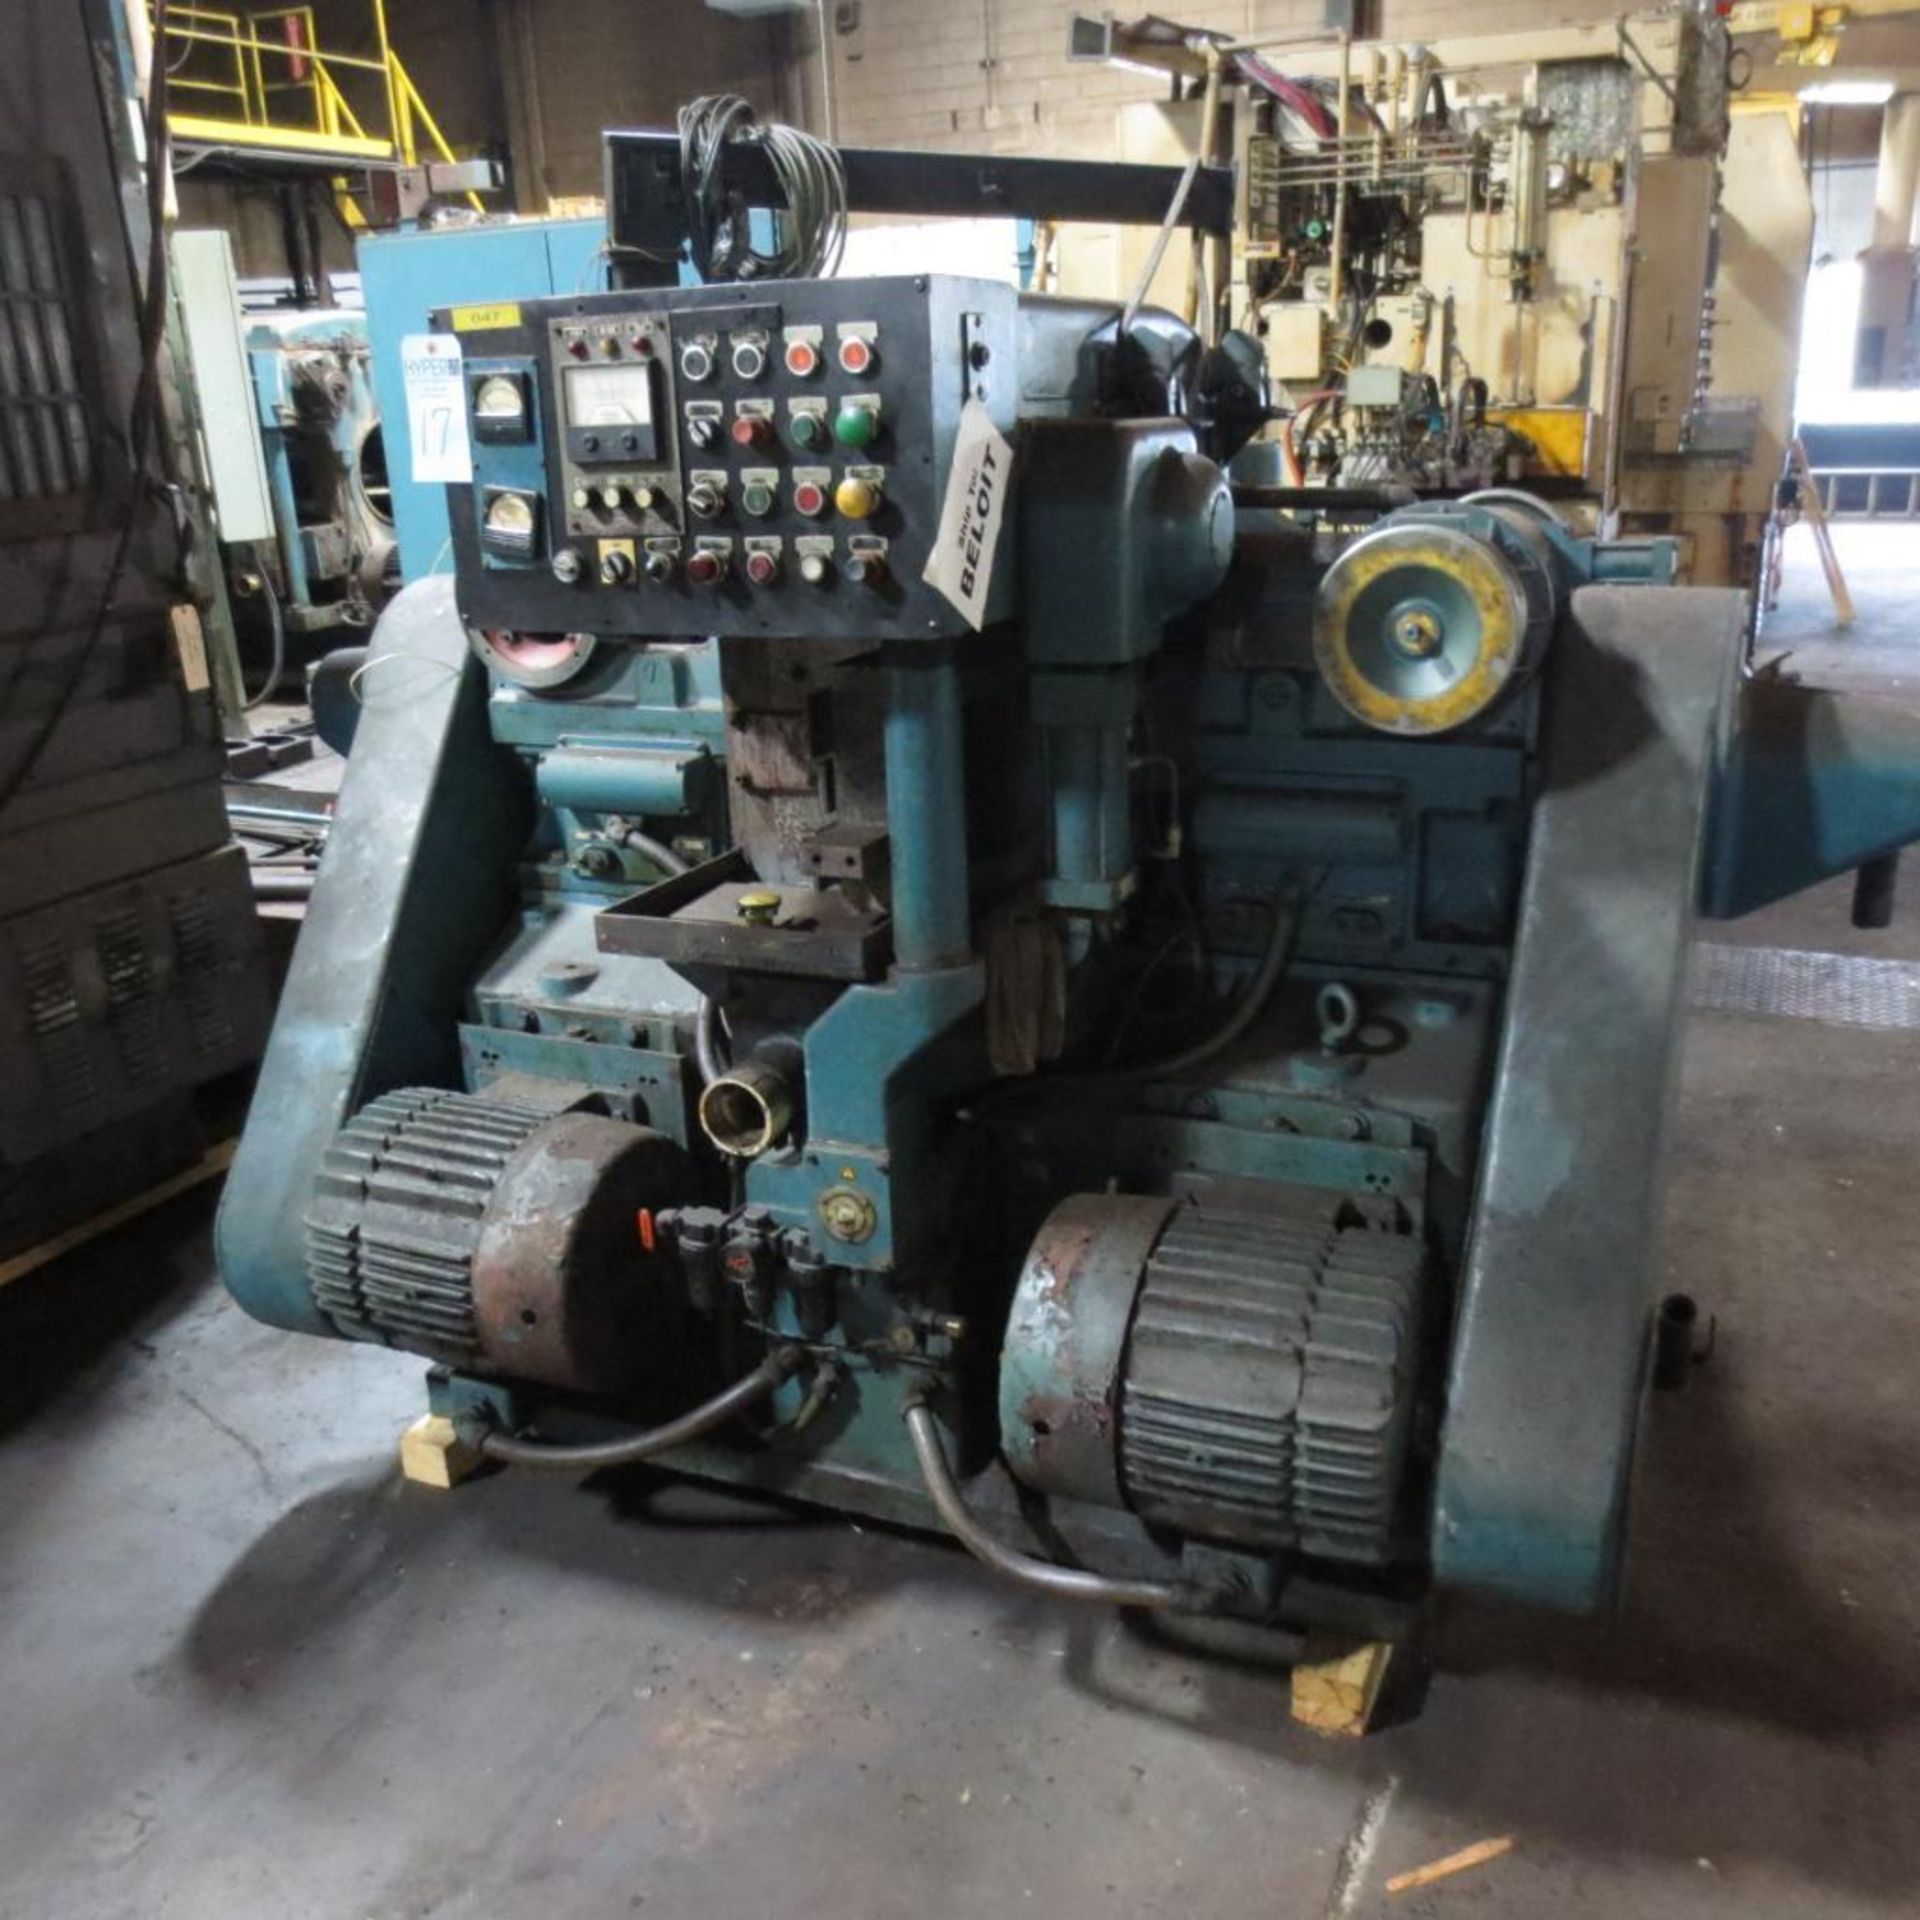 Besly Model DH6 Double Disc Grinder (2) 25-HP Motor Drives, Push-Button Control. Loading Fee is $550